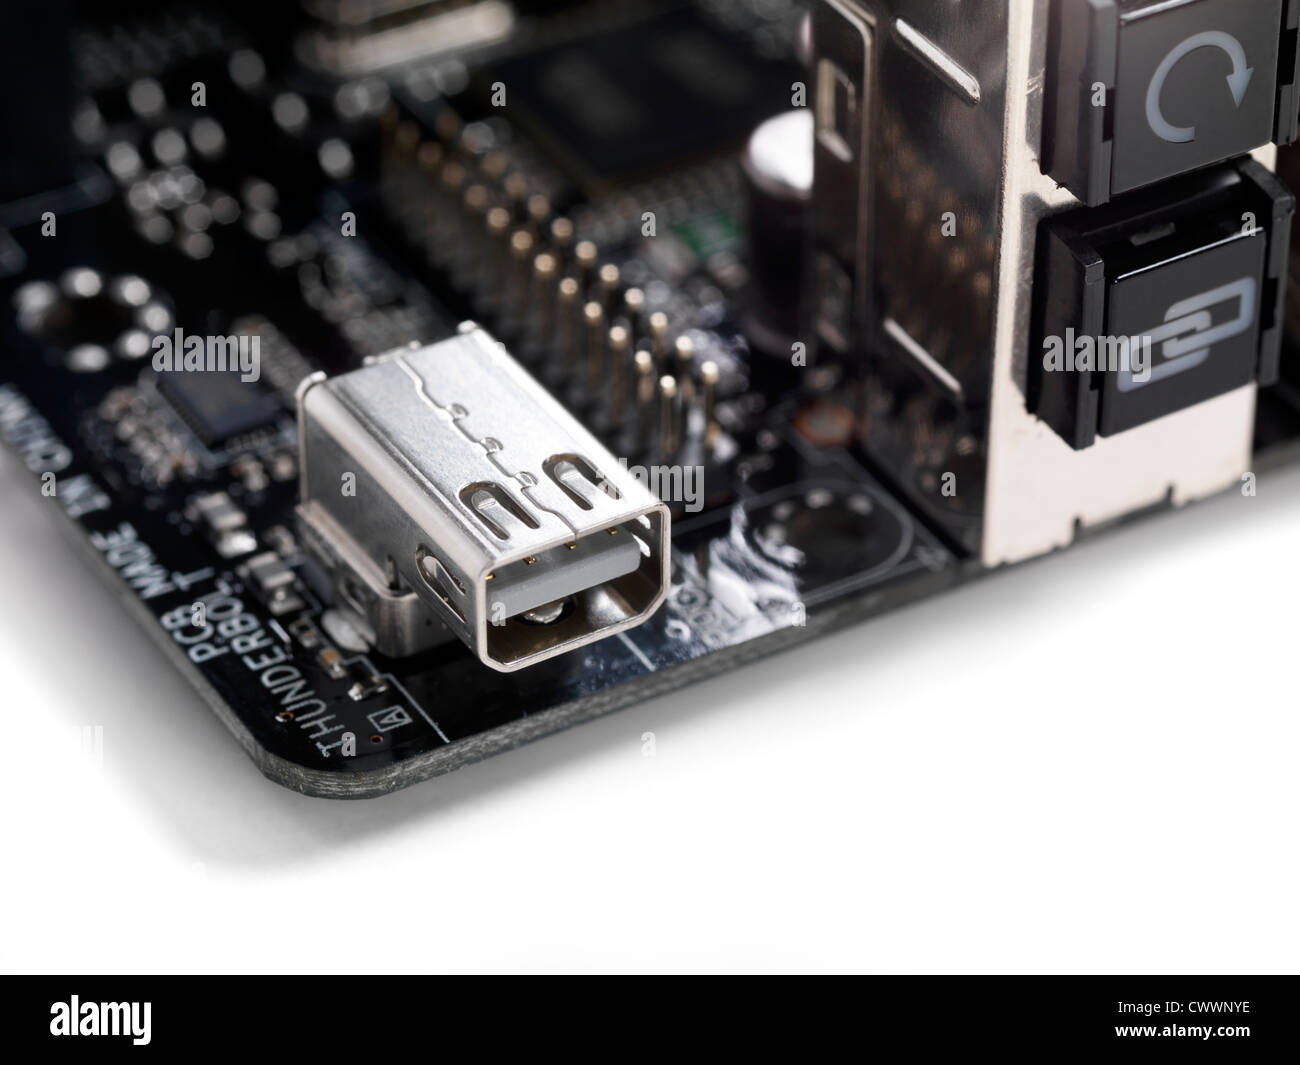 Intel Thunderbolt connector socket on a motherboard Stock Photo - Alamy